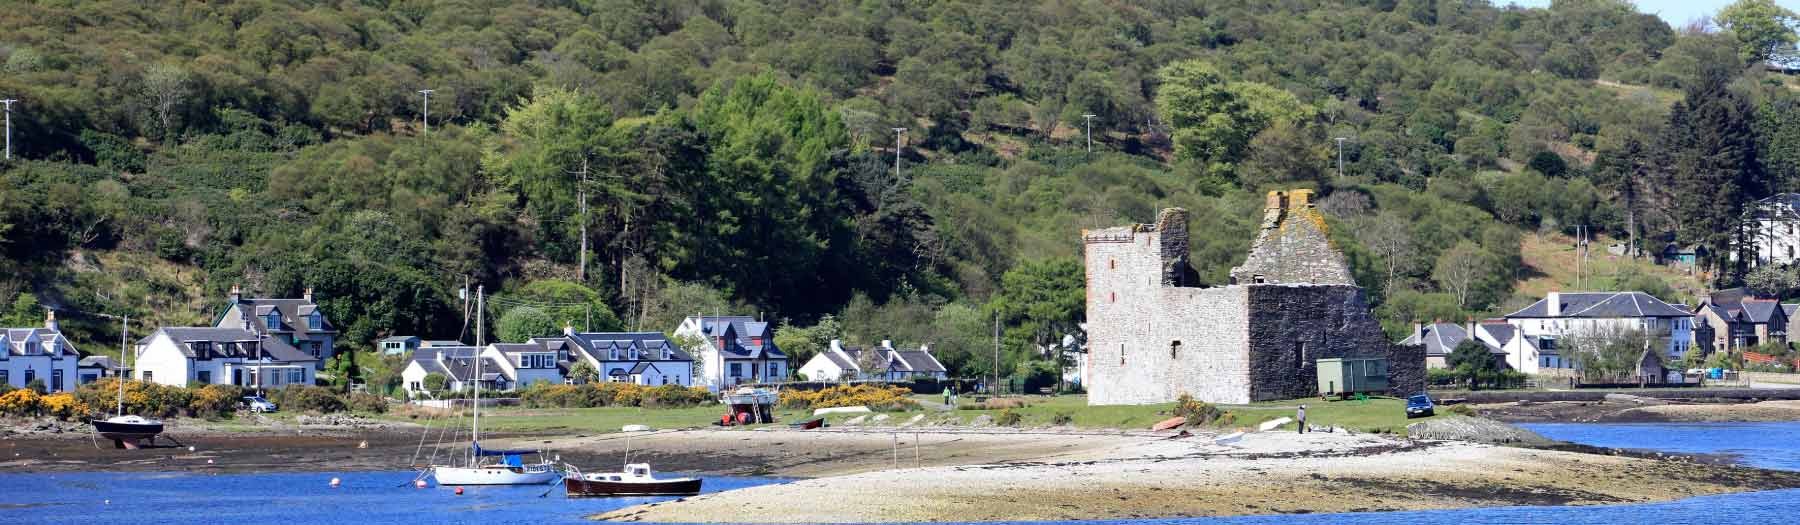 Image: Lochranza Castle. Credit: Image used with permission from VisitScotland and Scottish Viewpoint.